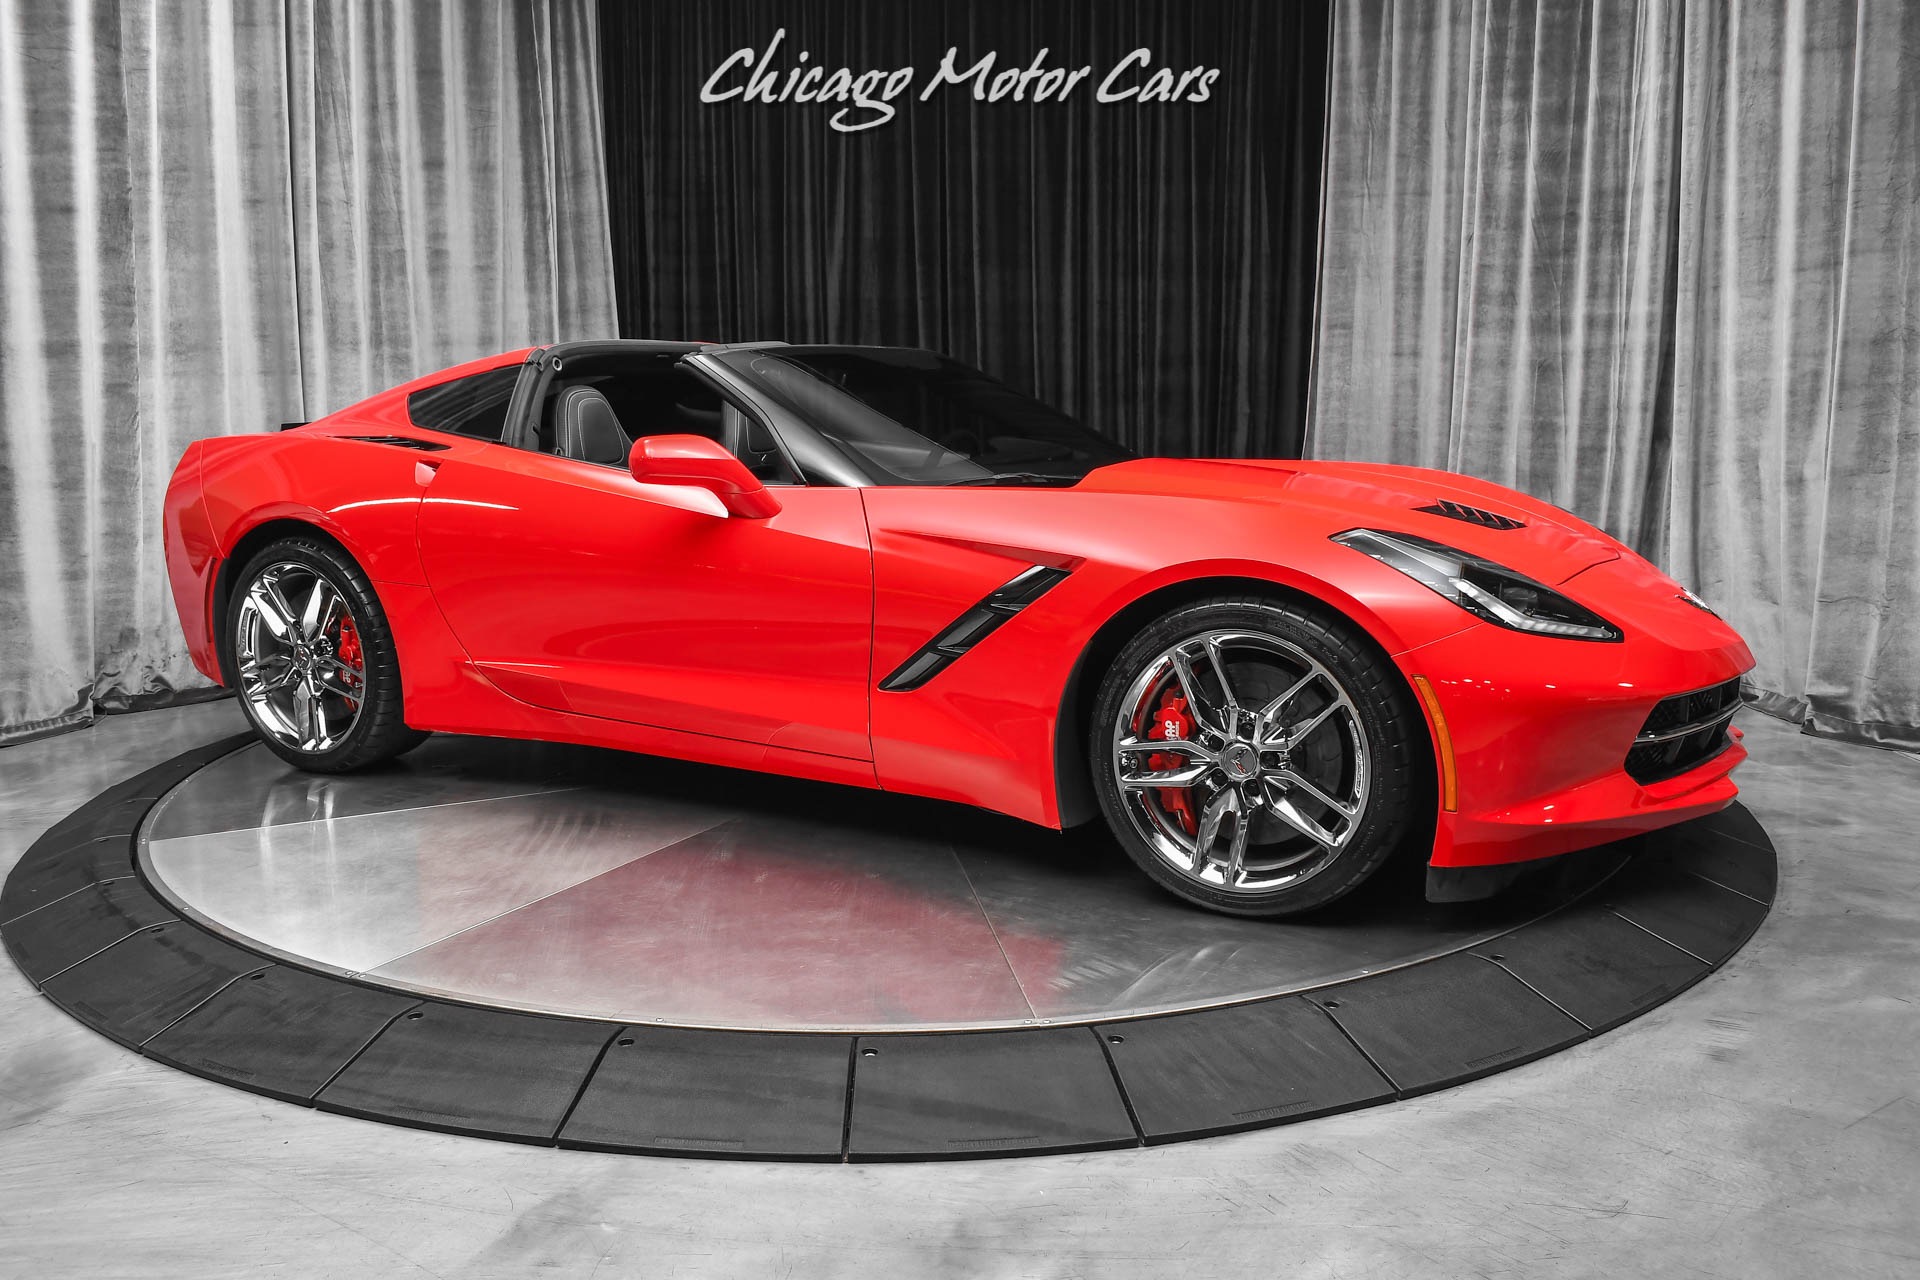 Used-2014-Chevrolet-Corvette-Stingray-2LT-7-Speed-Manual-100k-In-Upgrades-Supercharged